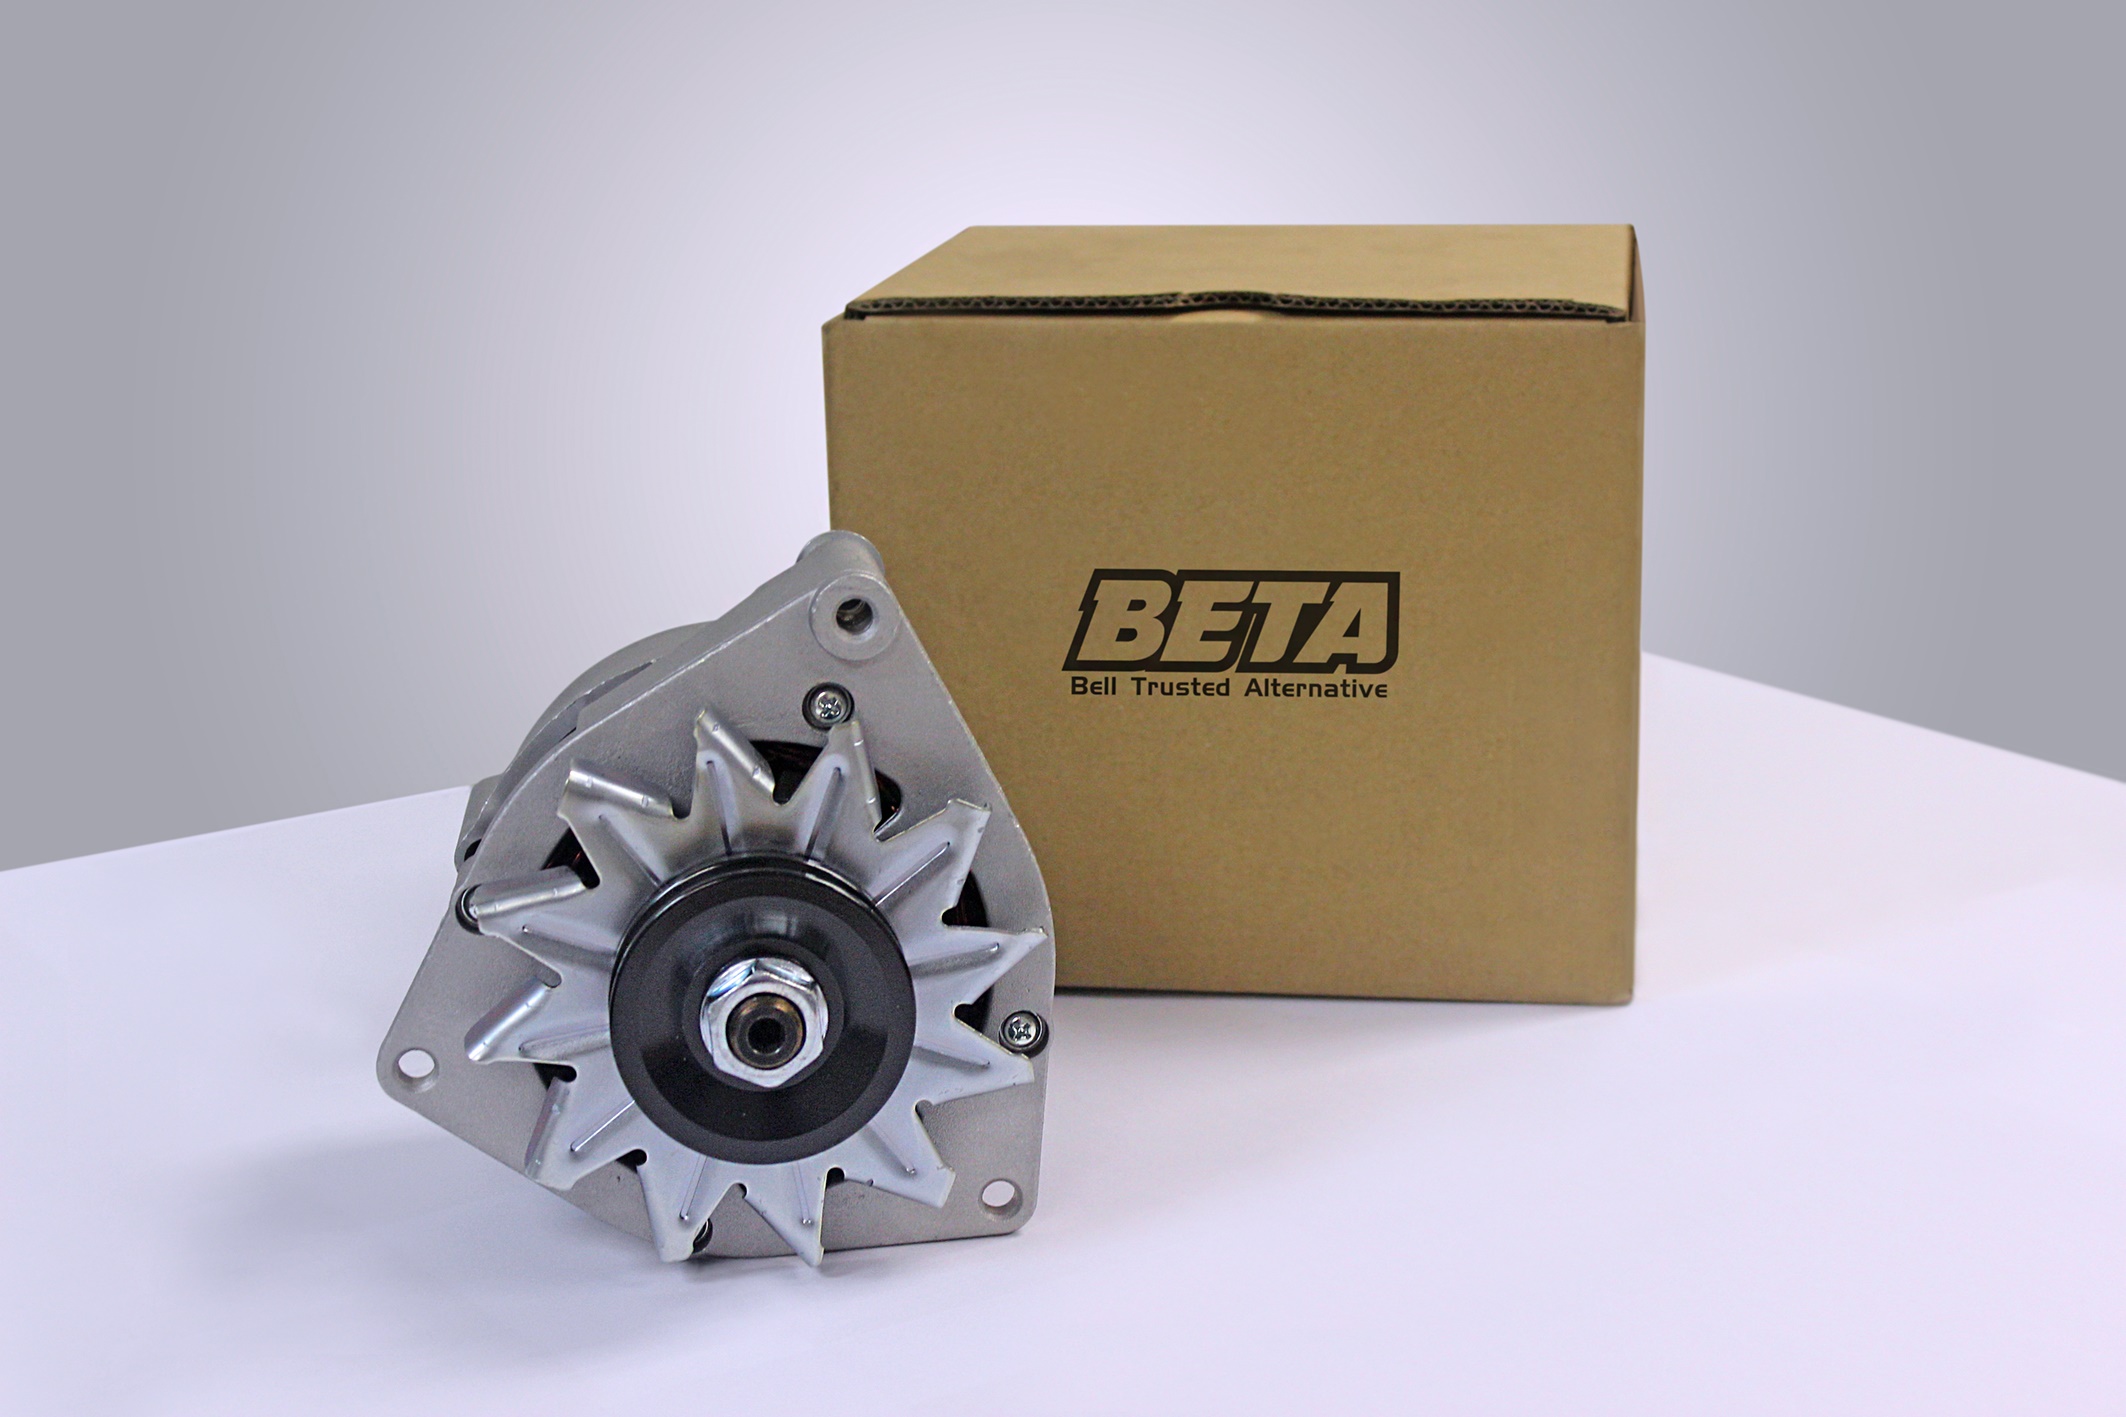 Bell Equipment is launching a new aftermarket product, BETA Parts.